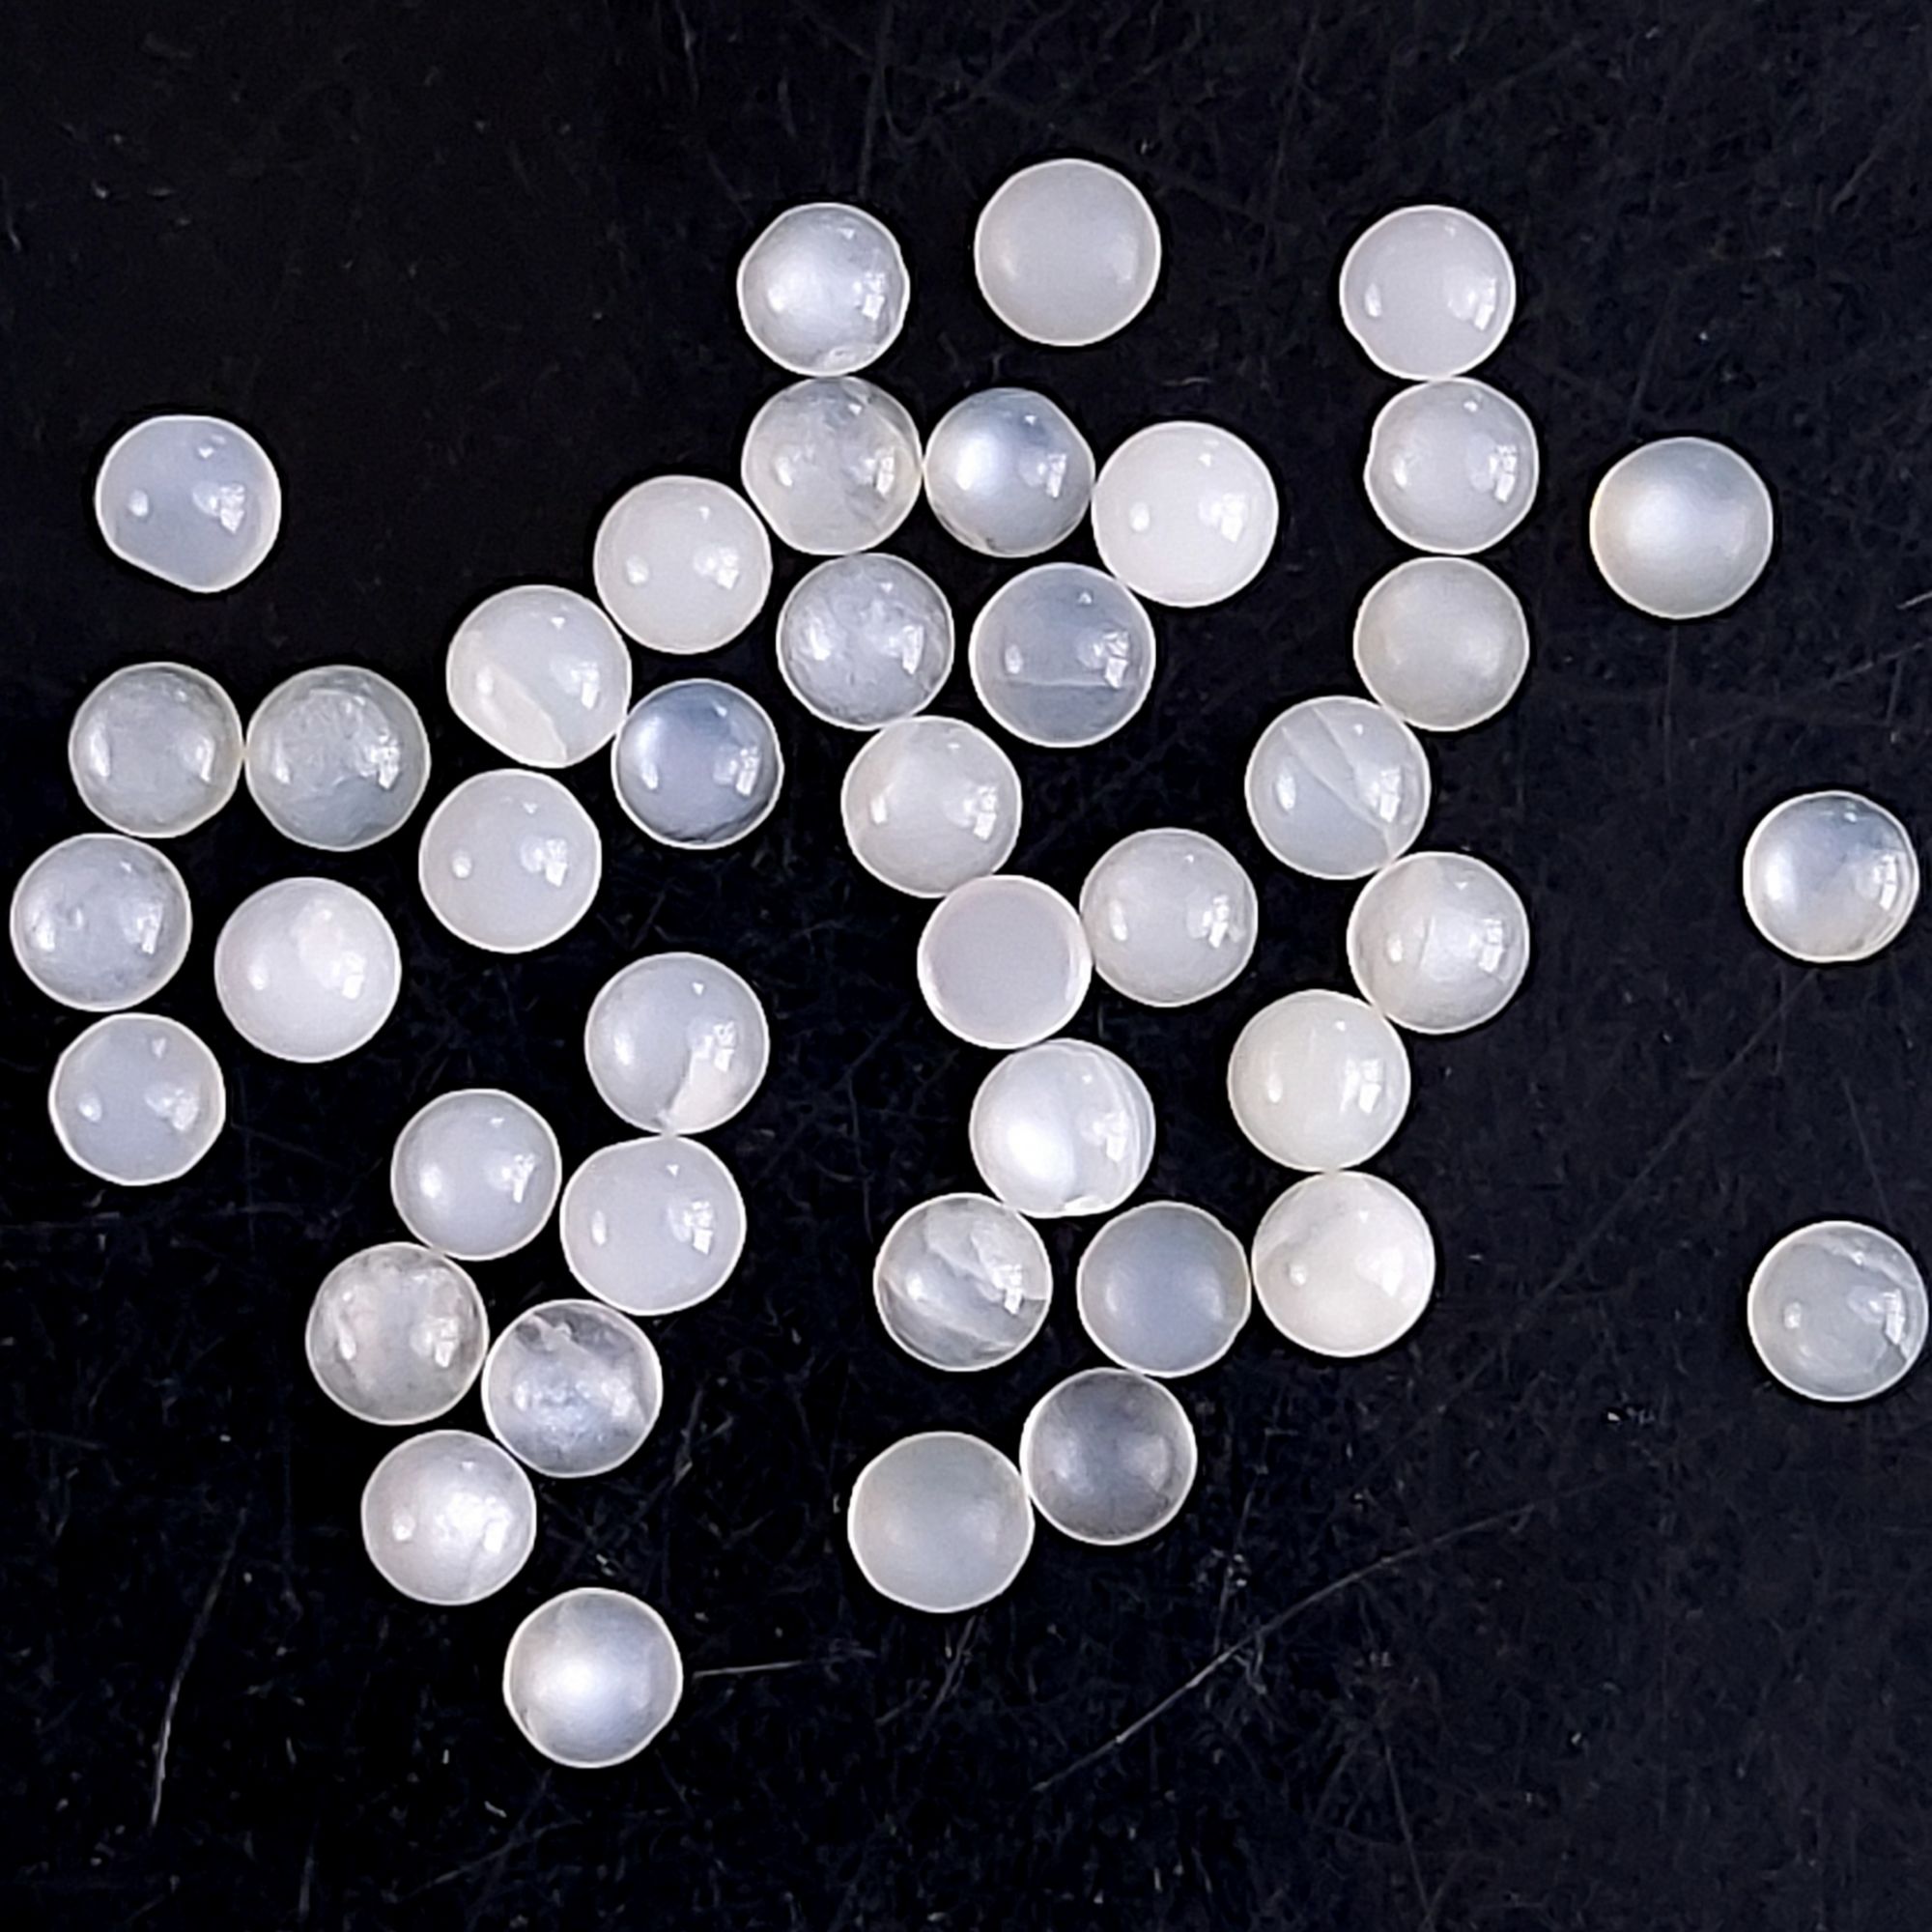 44Pcs 14Cts Natural White Moonstone Loose Cabochon Round Shape Gemstone For Jewelry Making Lot 4x4mm#651